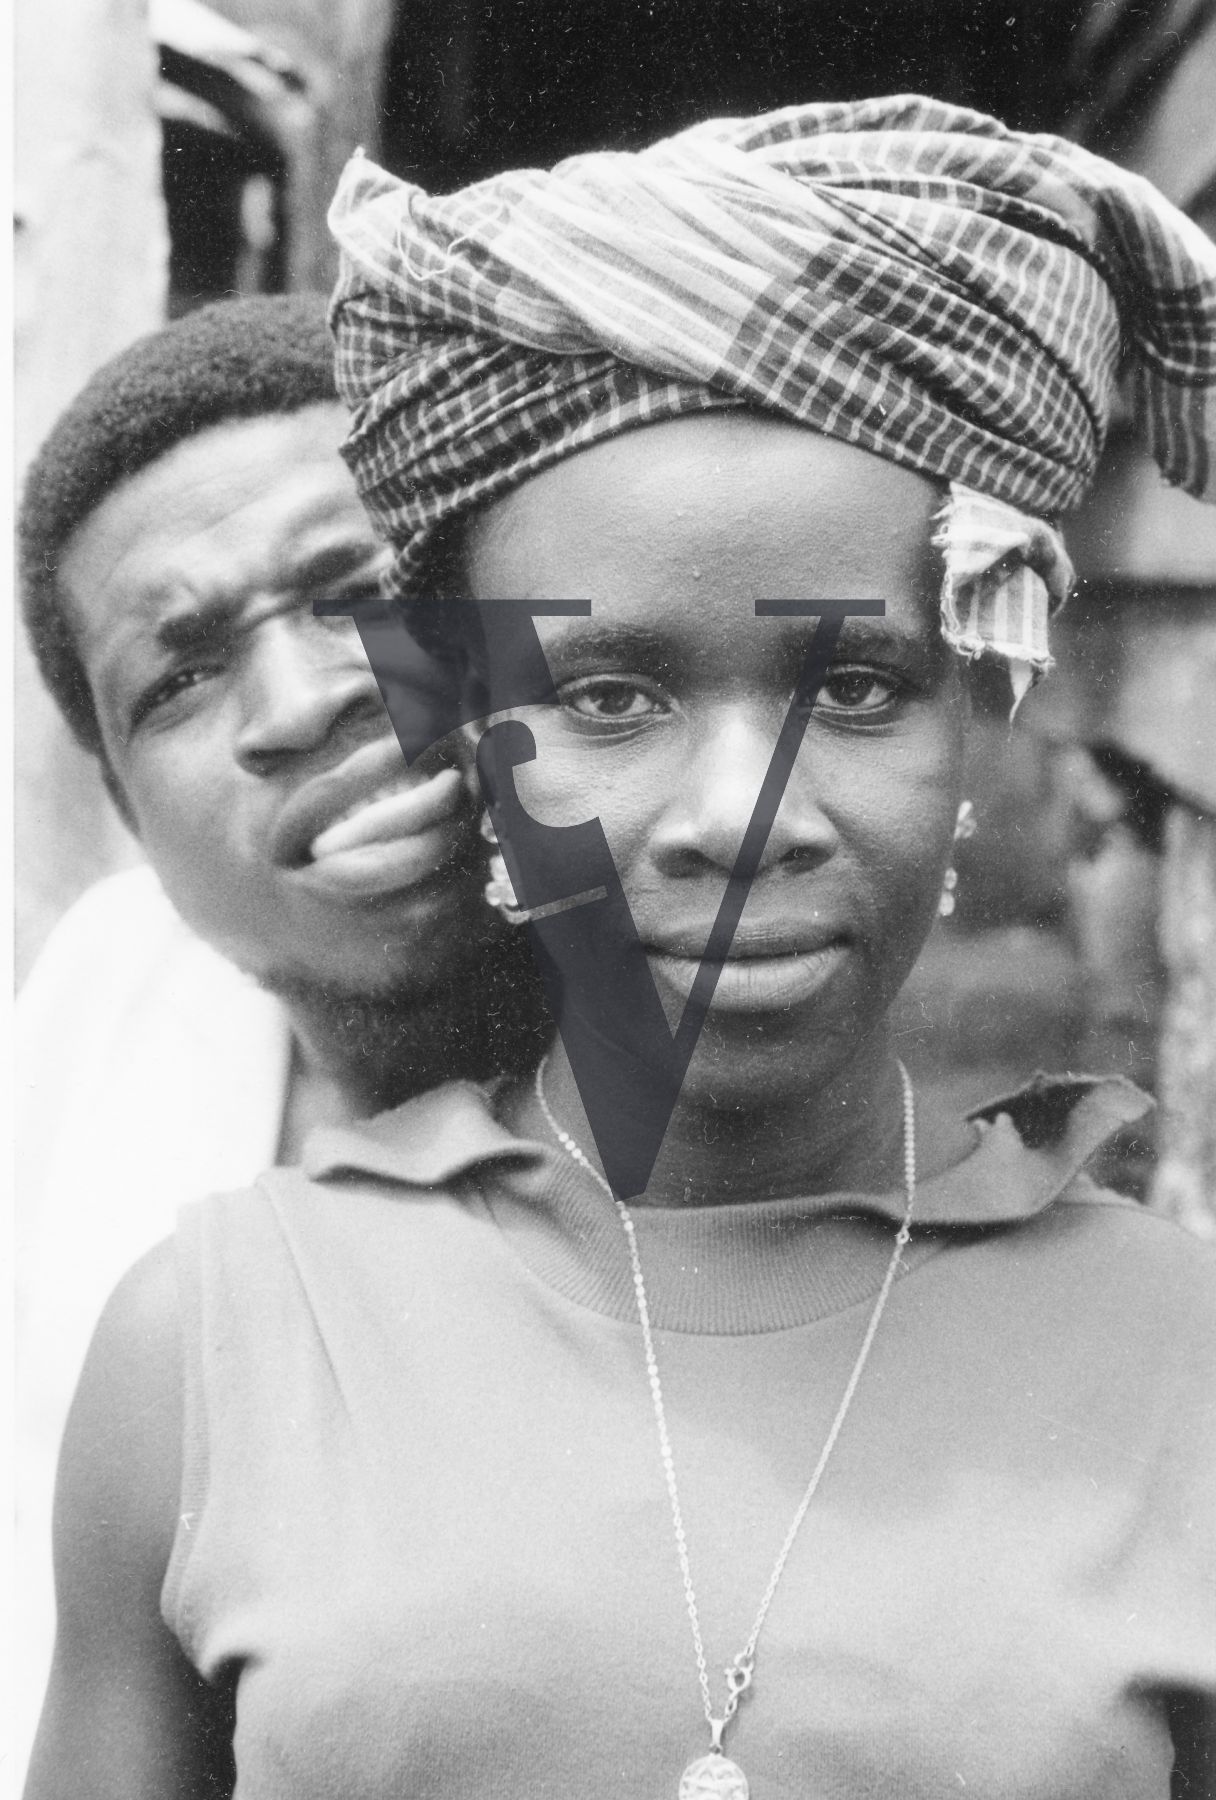 Sierra Leone, streets, portrait, woman and man, tongue out.